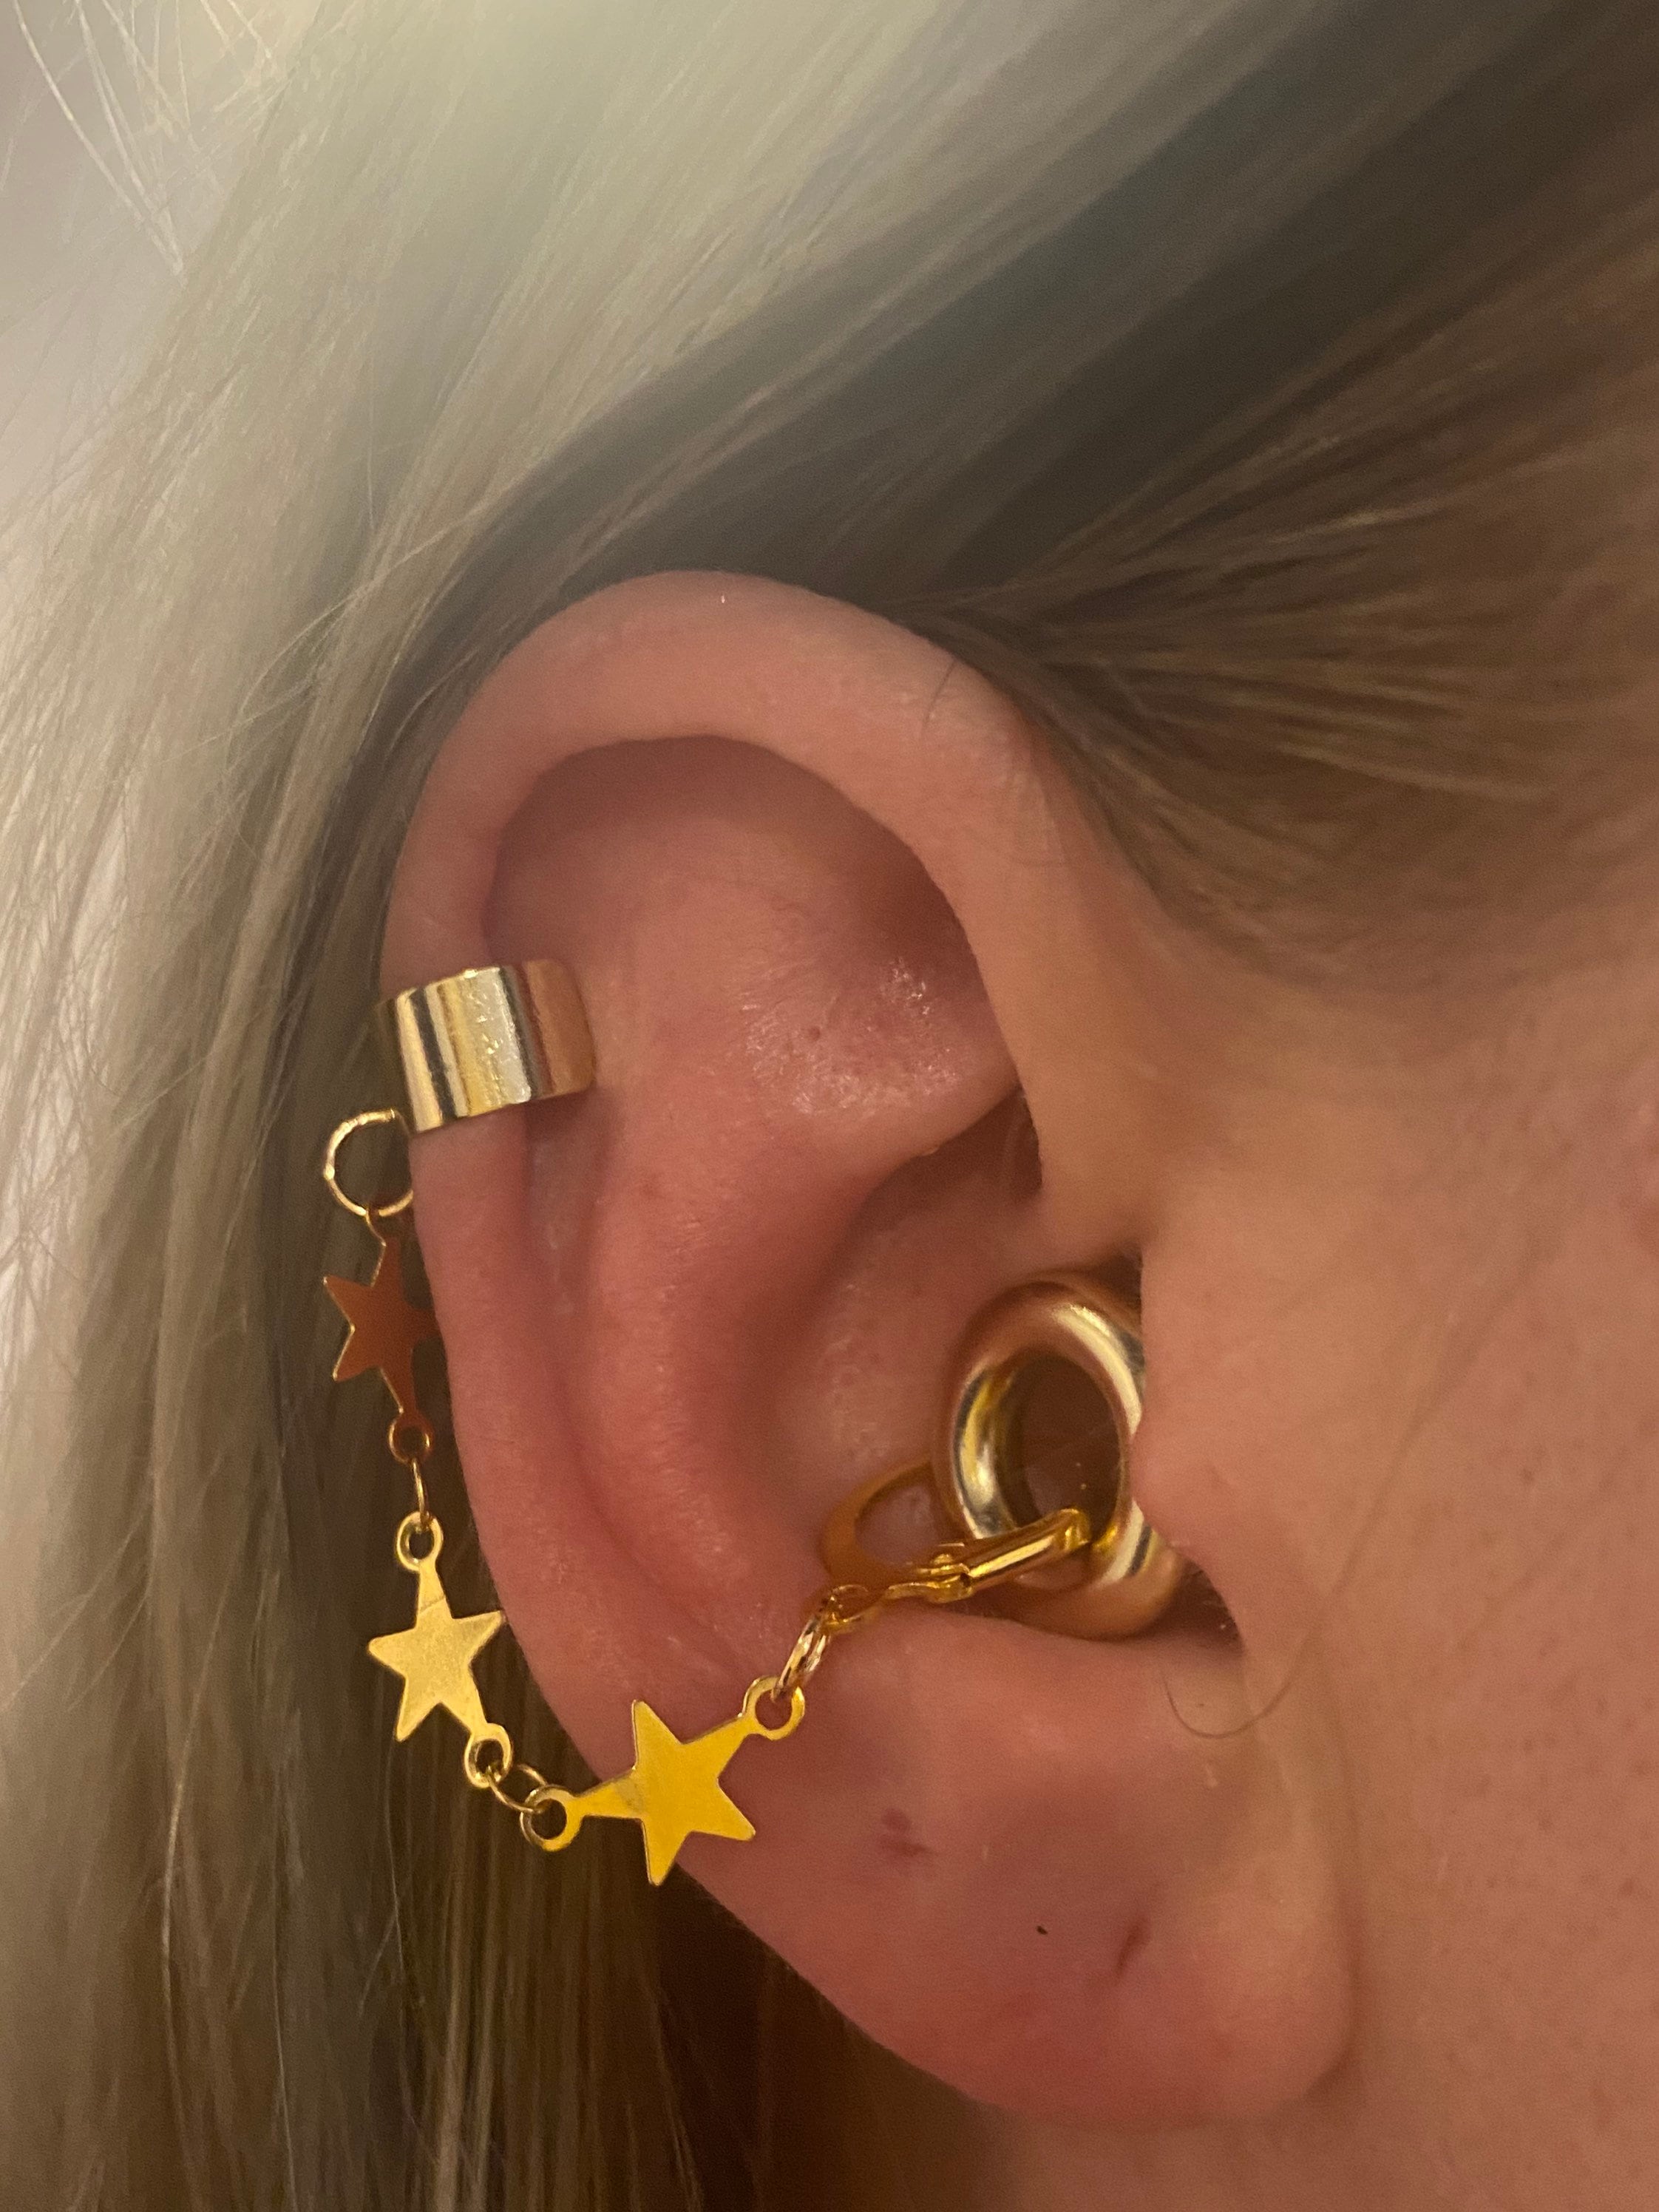 Loop Earplugs? ADHD or Autism? Our earrings are a GAME CHANGER